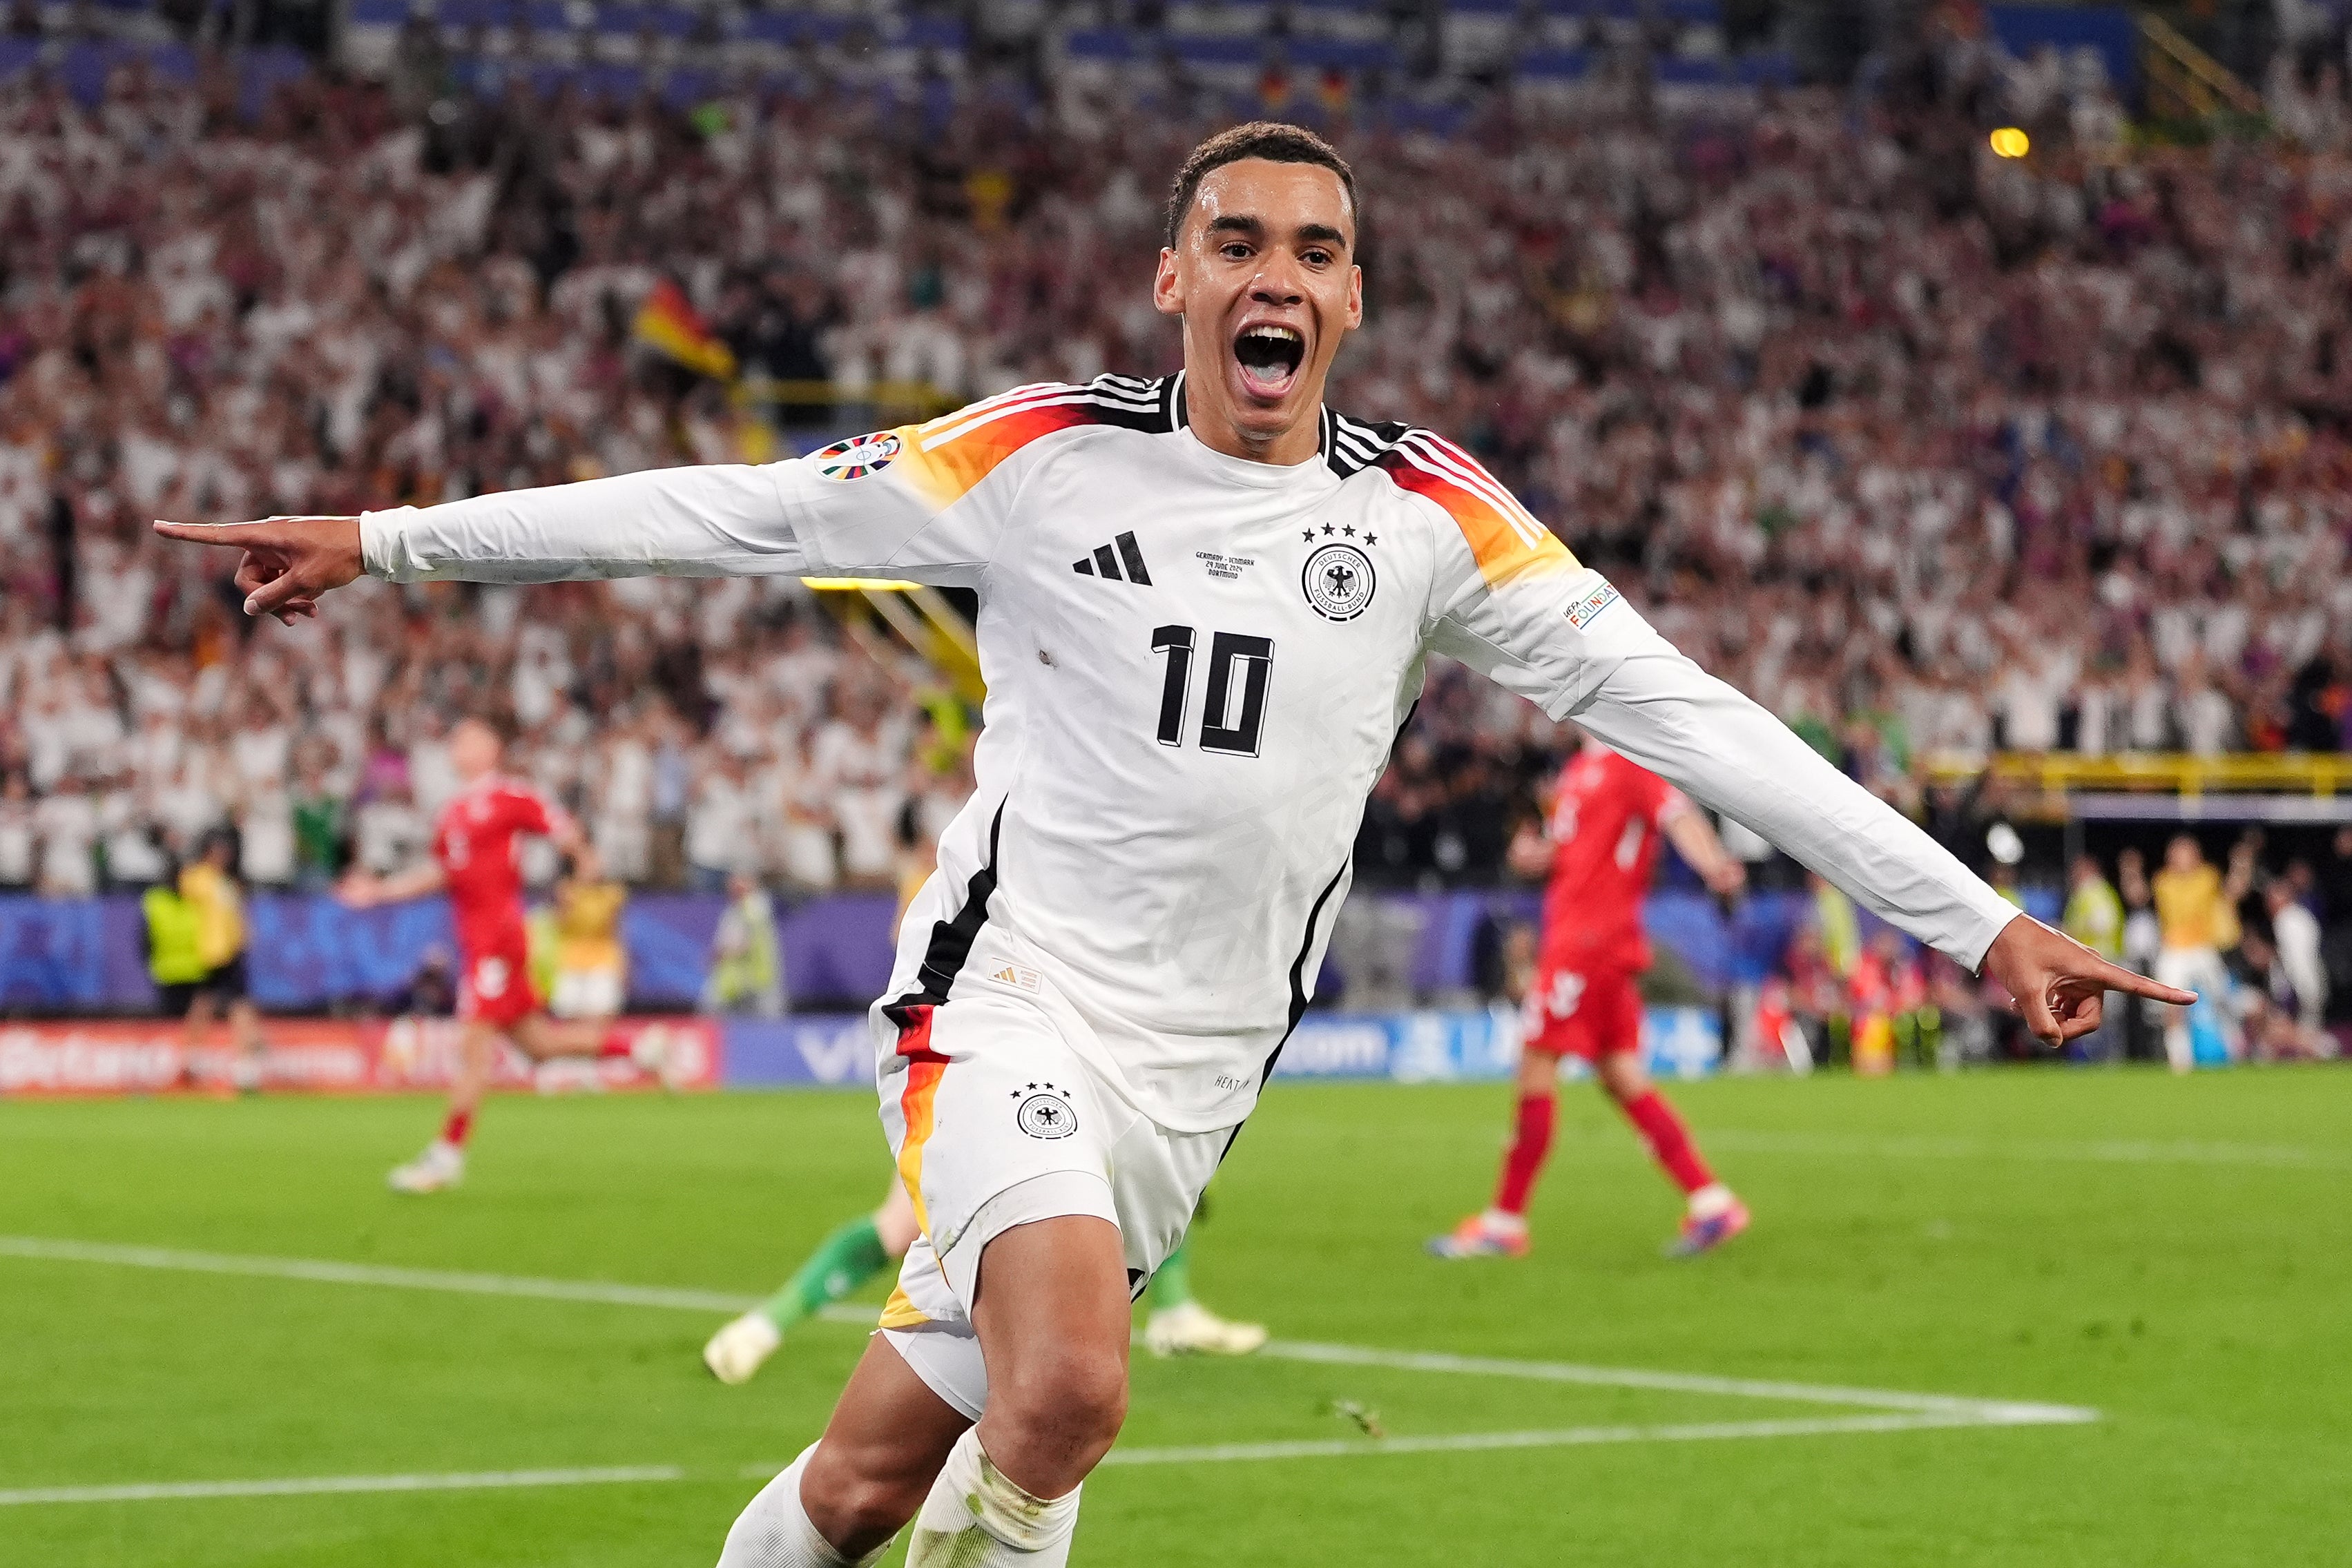 Jamal Musiala celebrates scoring Germany’s second goal against Denmark, his third of the tournament